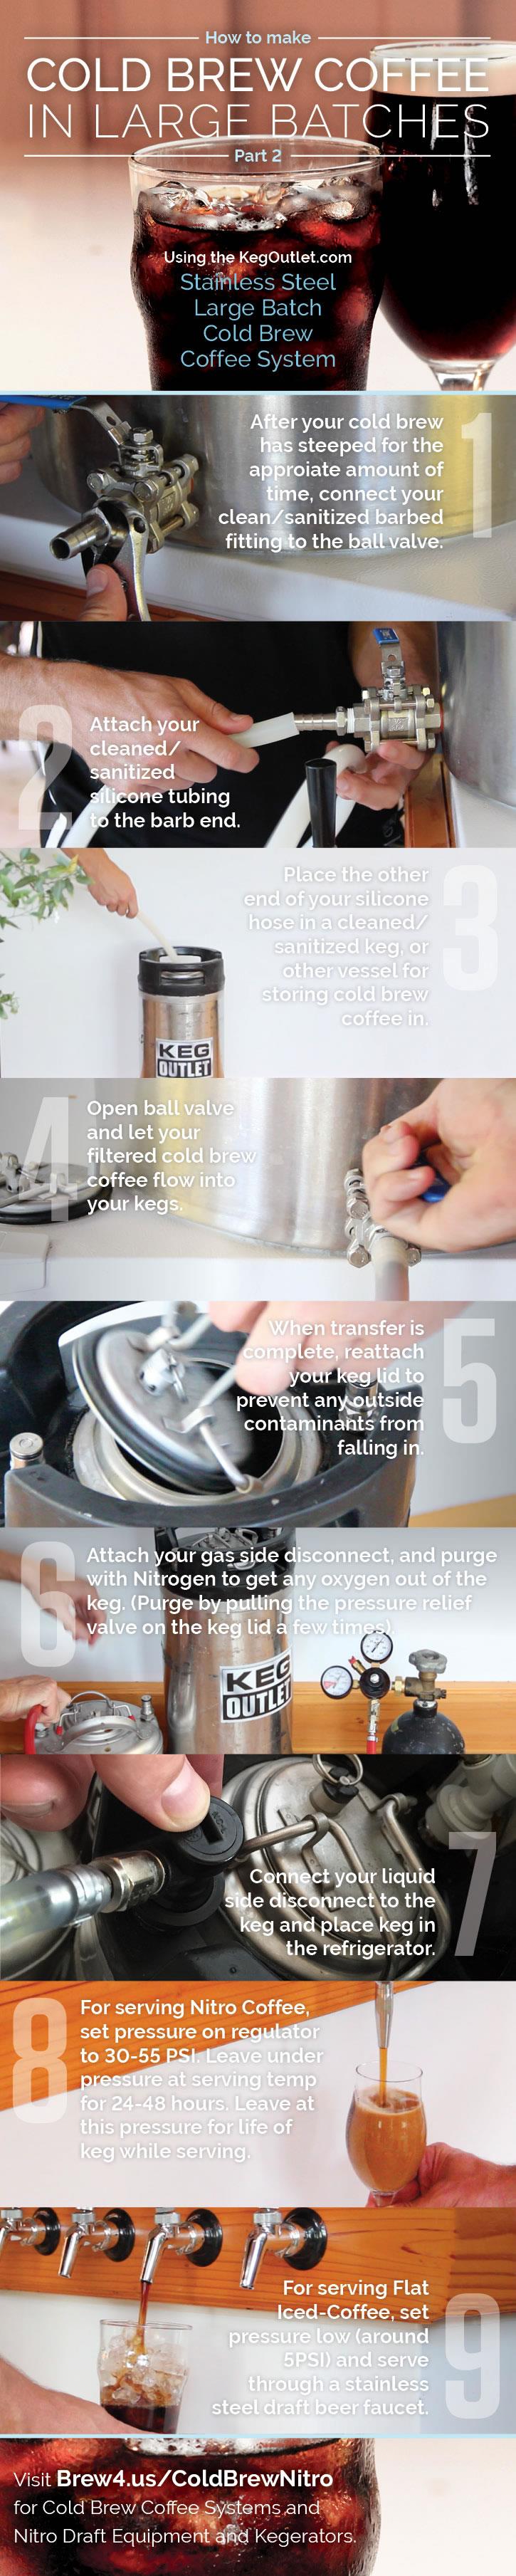 How to Cold Brew Coffee in Large Batches for Serving Draft and Nitro Coffee [INFOGRAPHIC]